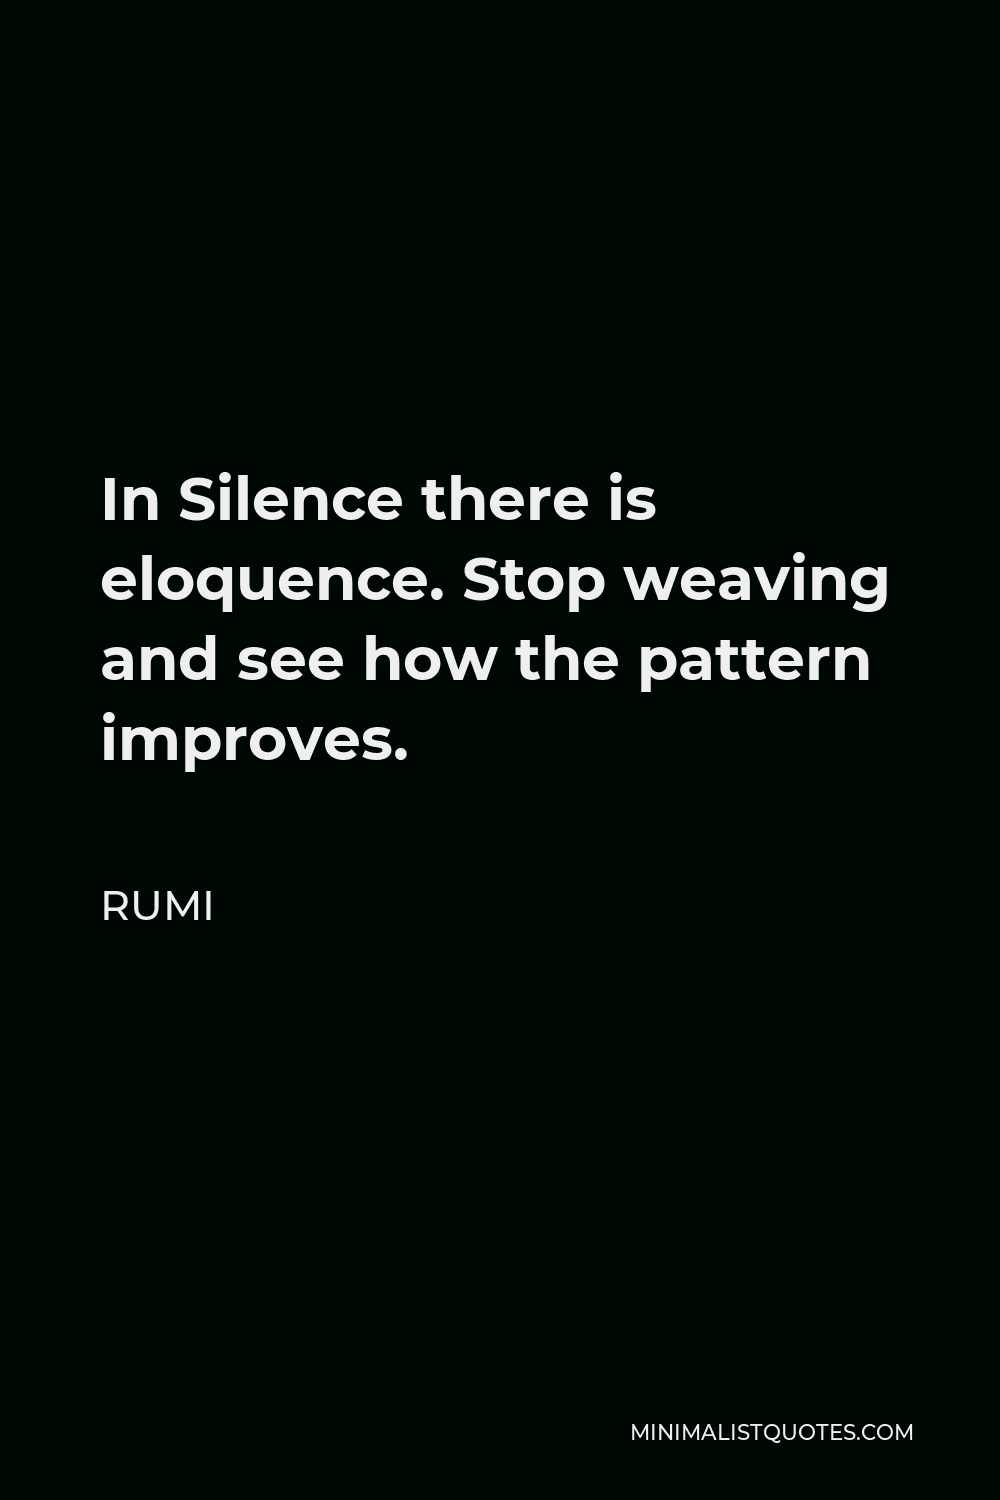 Rumi Quote - In Silence there is eloquence. Stop weaving and see how the pattern improves.